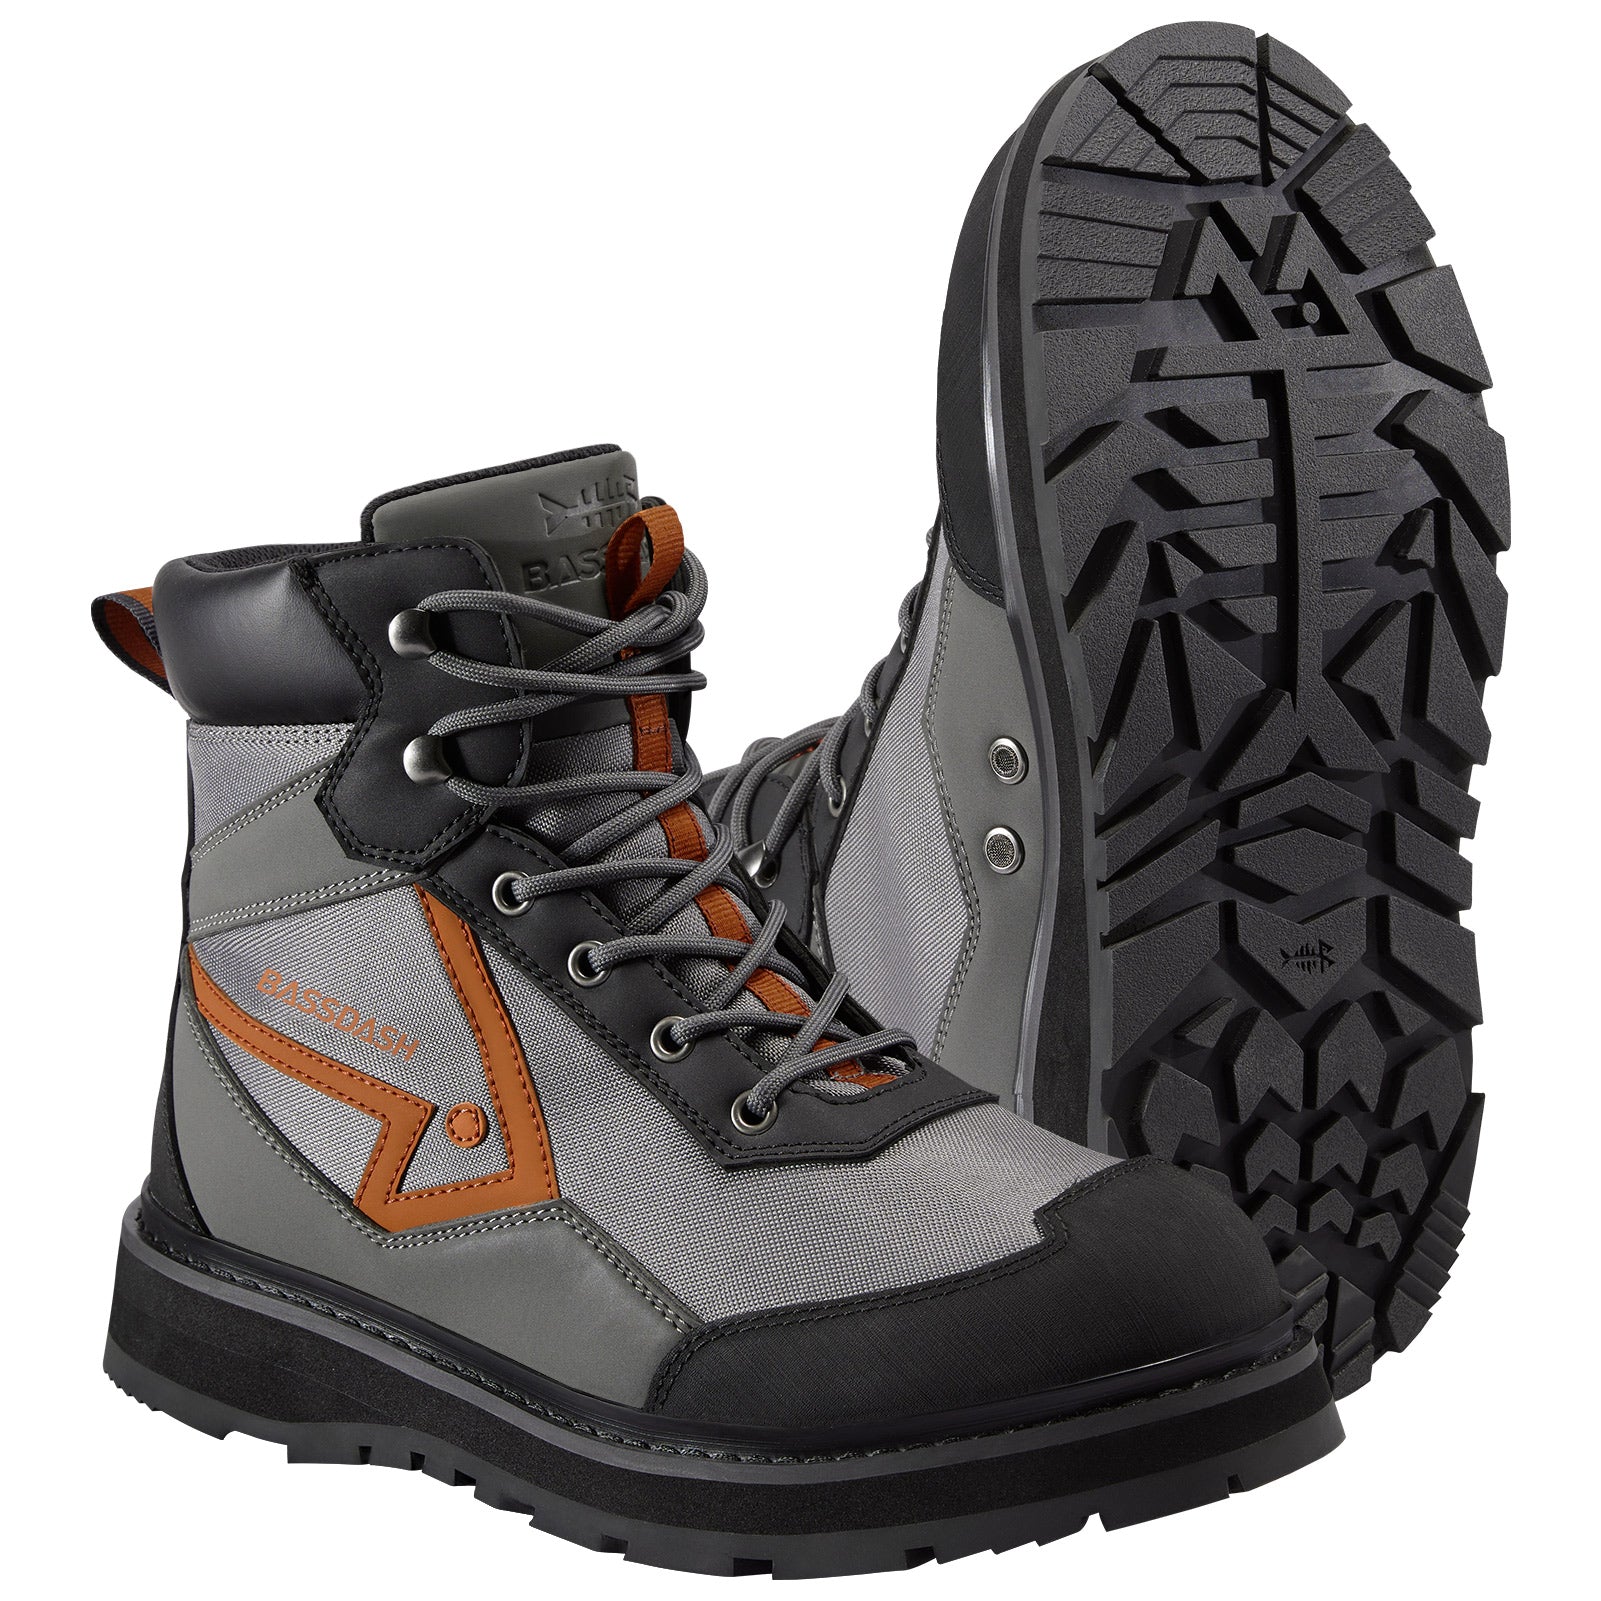 Mens Wading Boots Fly Fishing Wading Shoes with Anti-Slip Rubber Sole